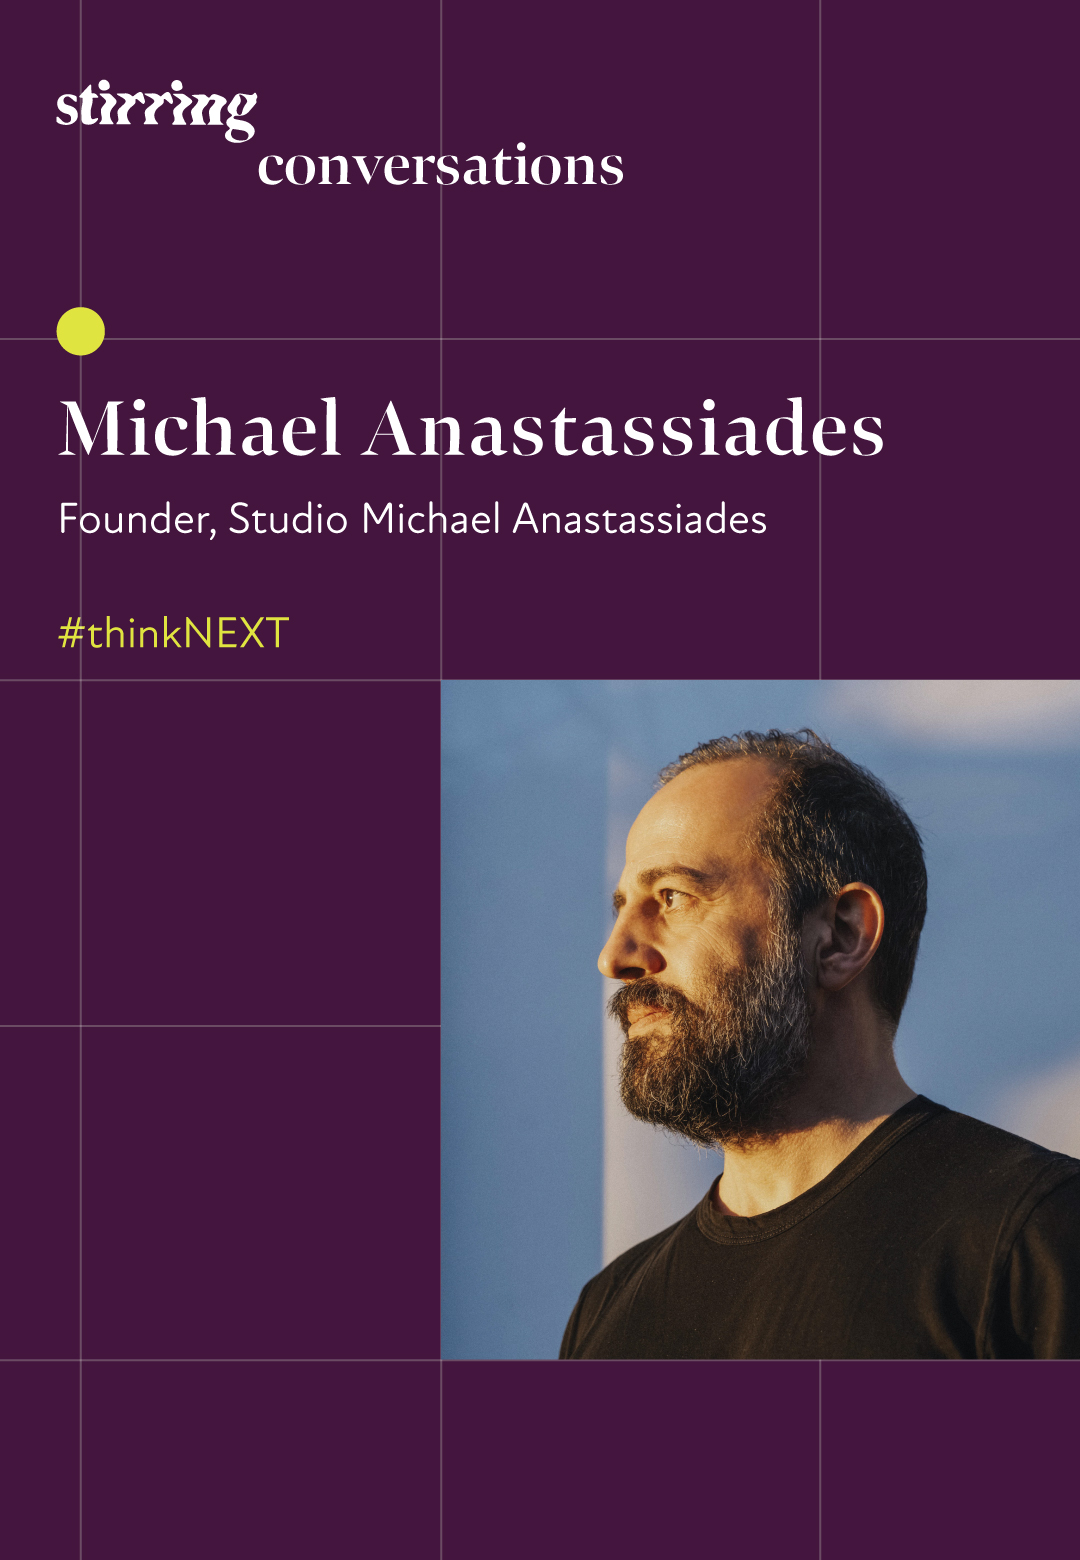 STIRring Conversations: Exploring ‘slowness in design’ with Michael Anastassiades